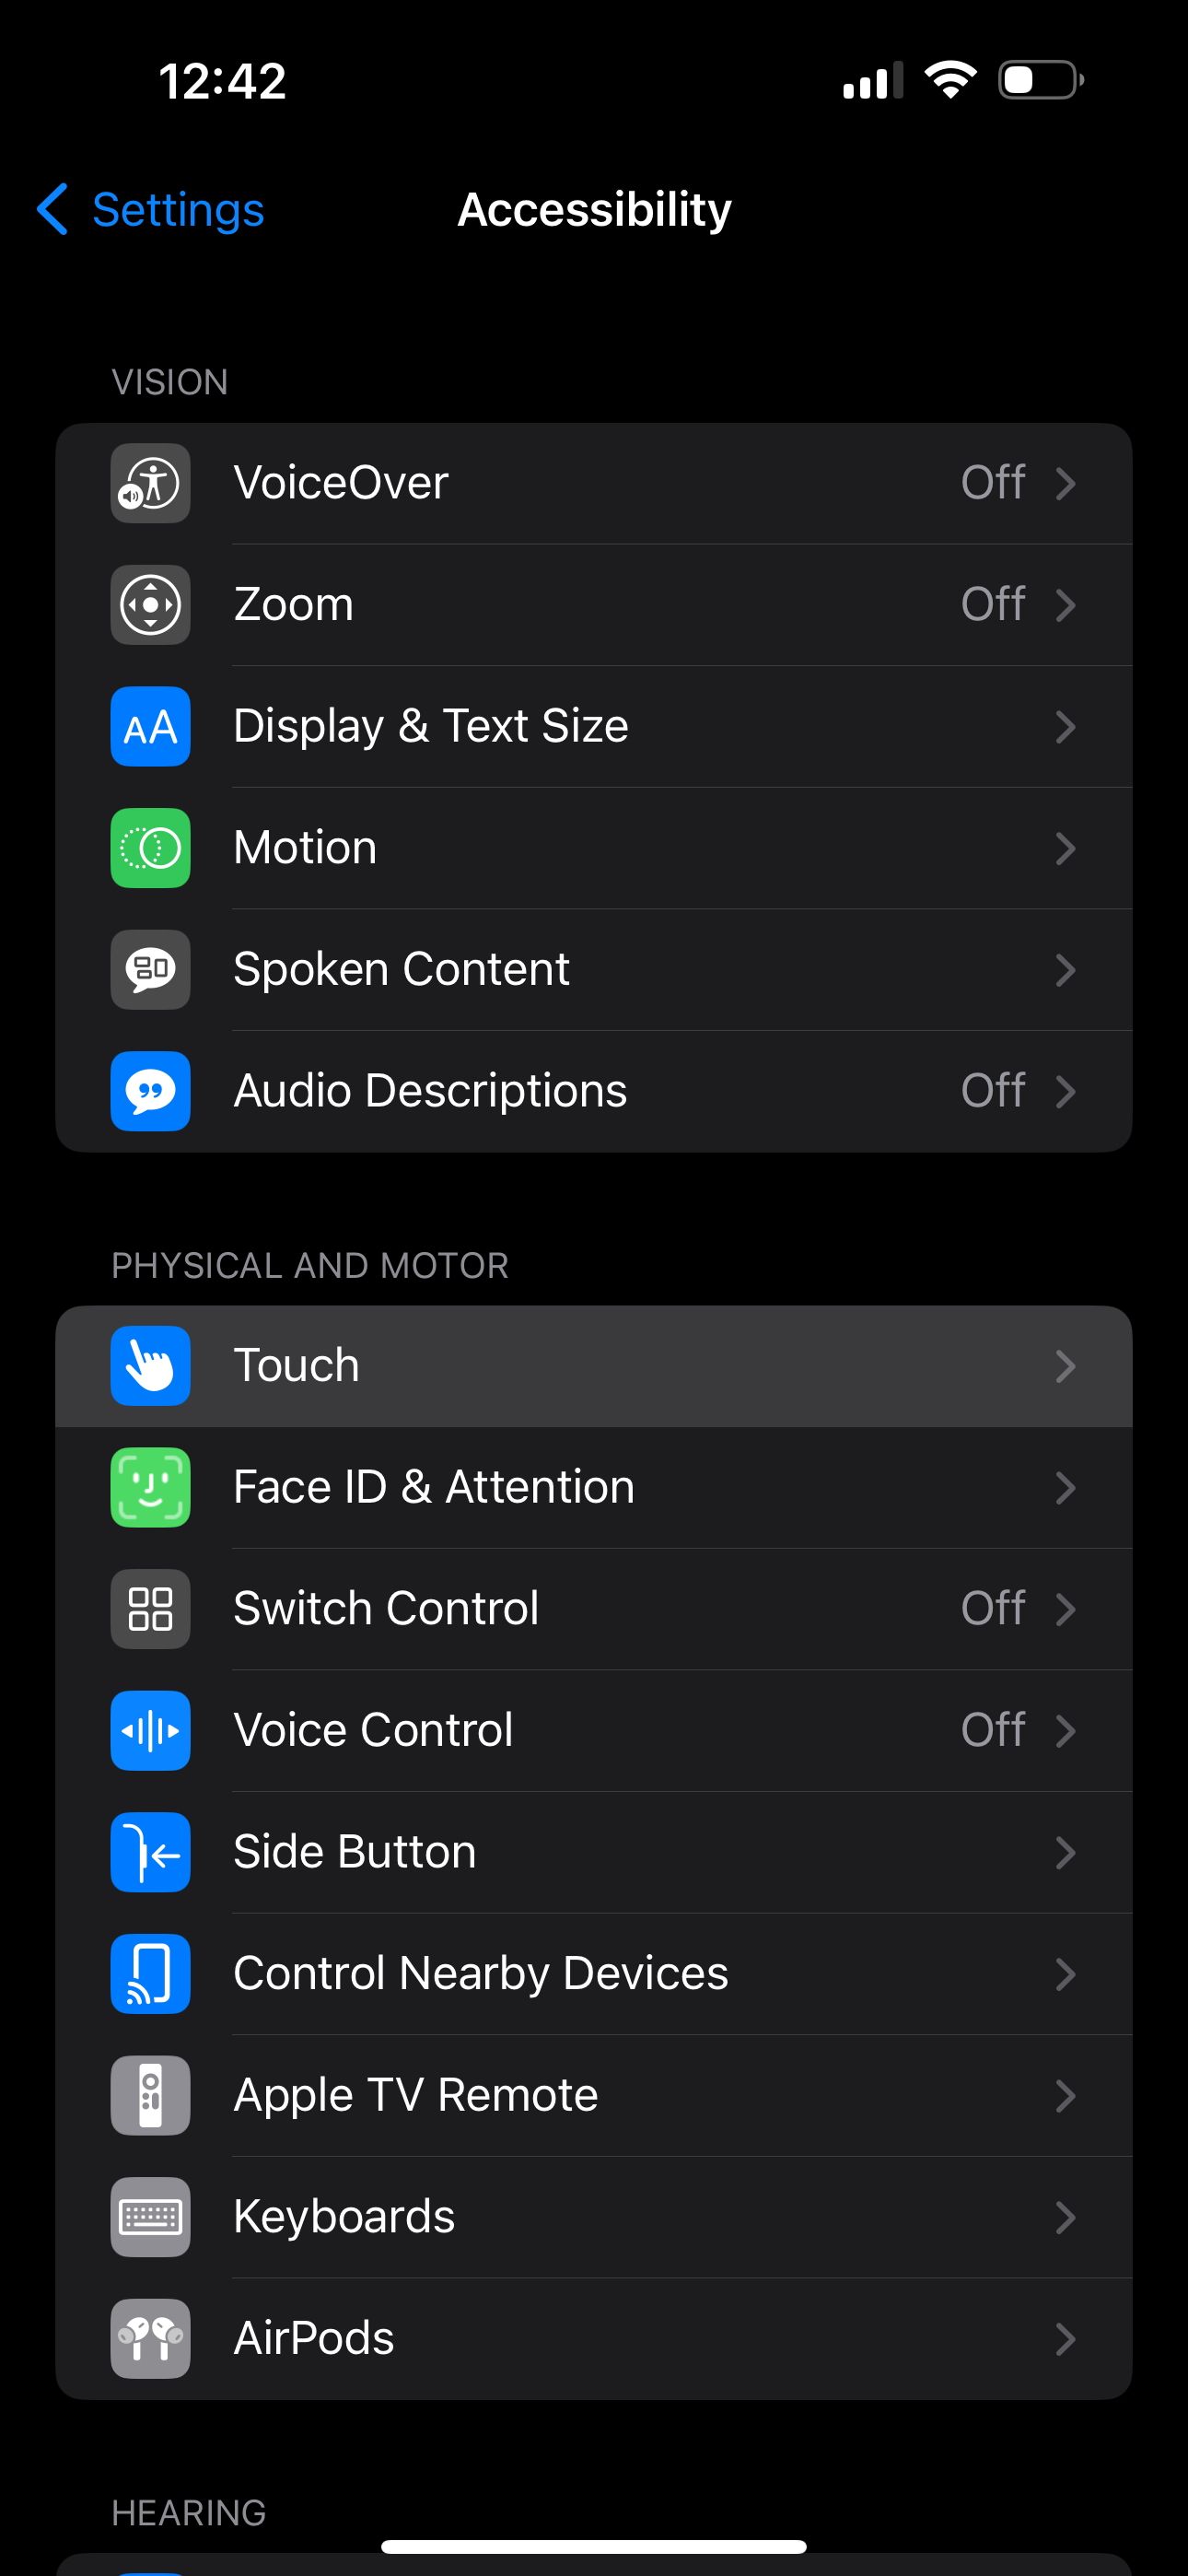 iOS Accessibility settings with Touch highlighted